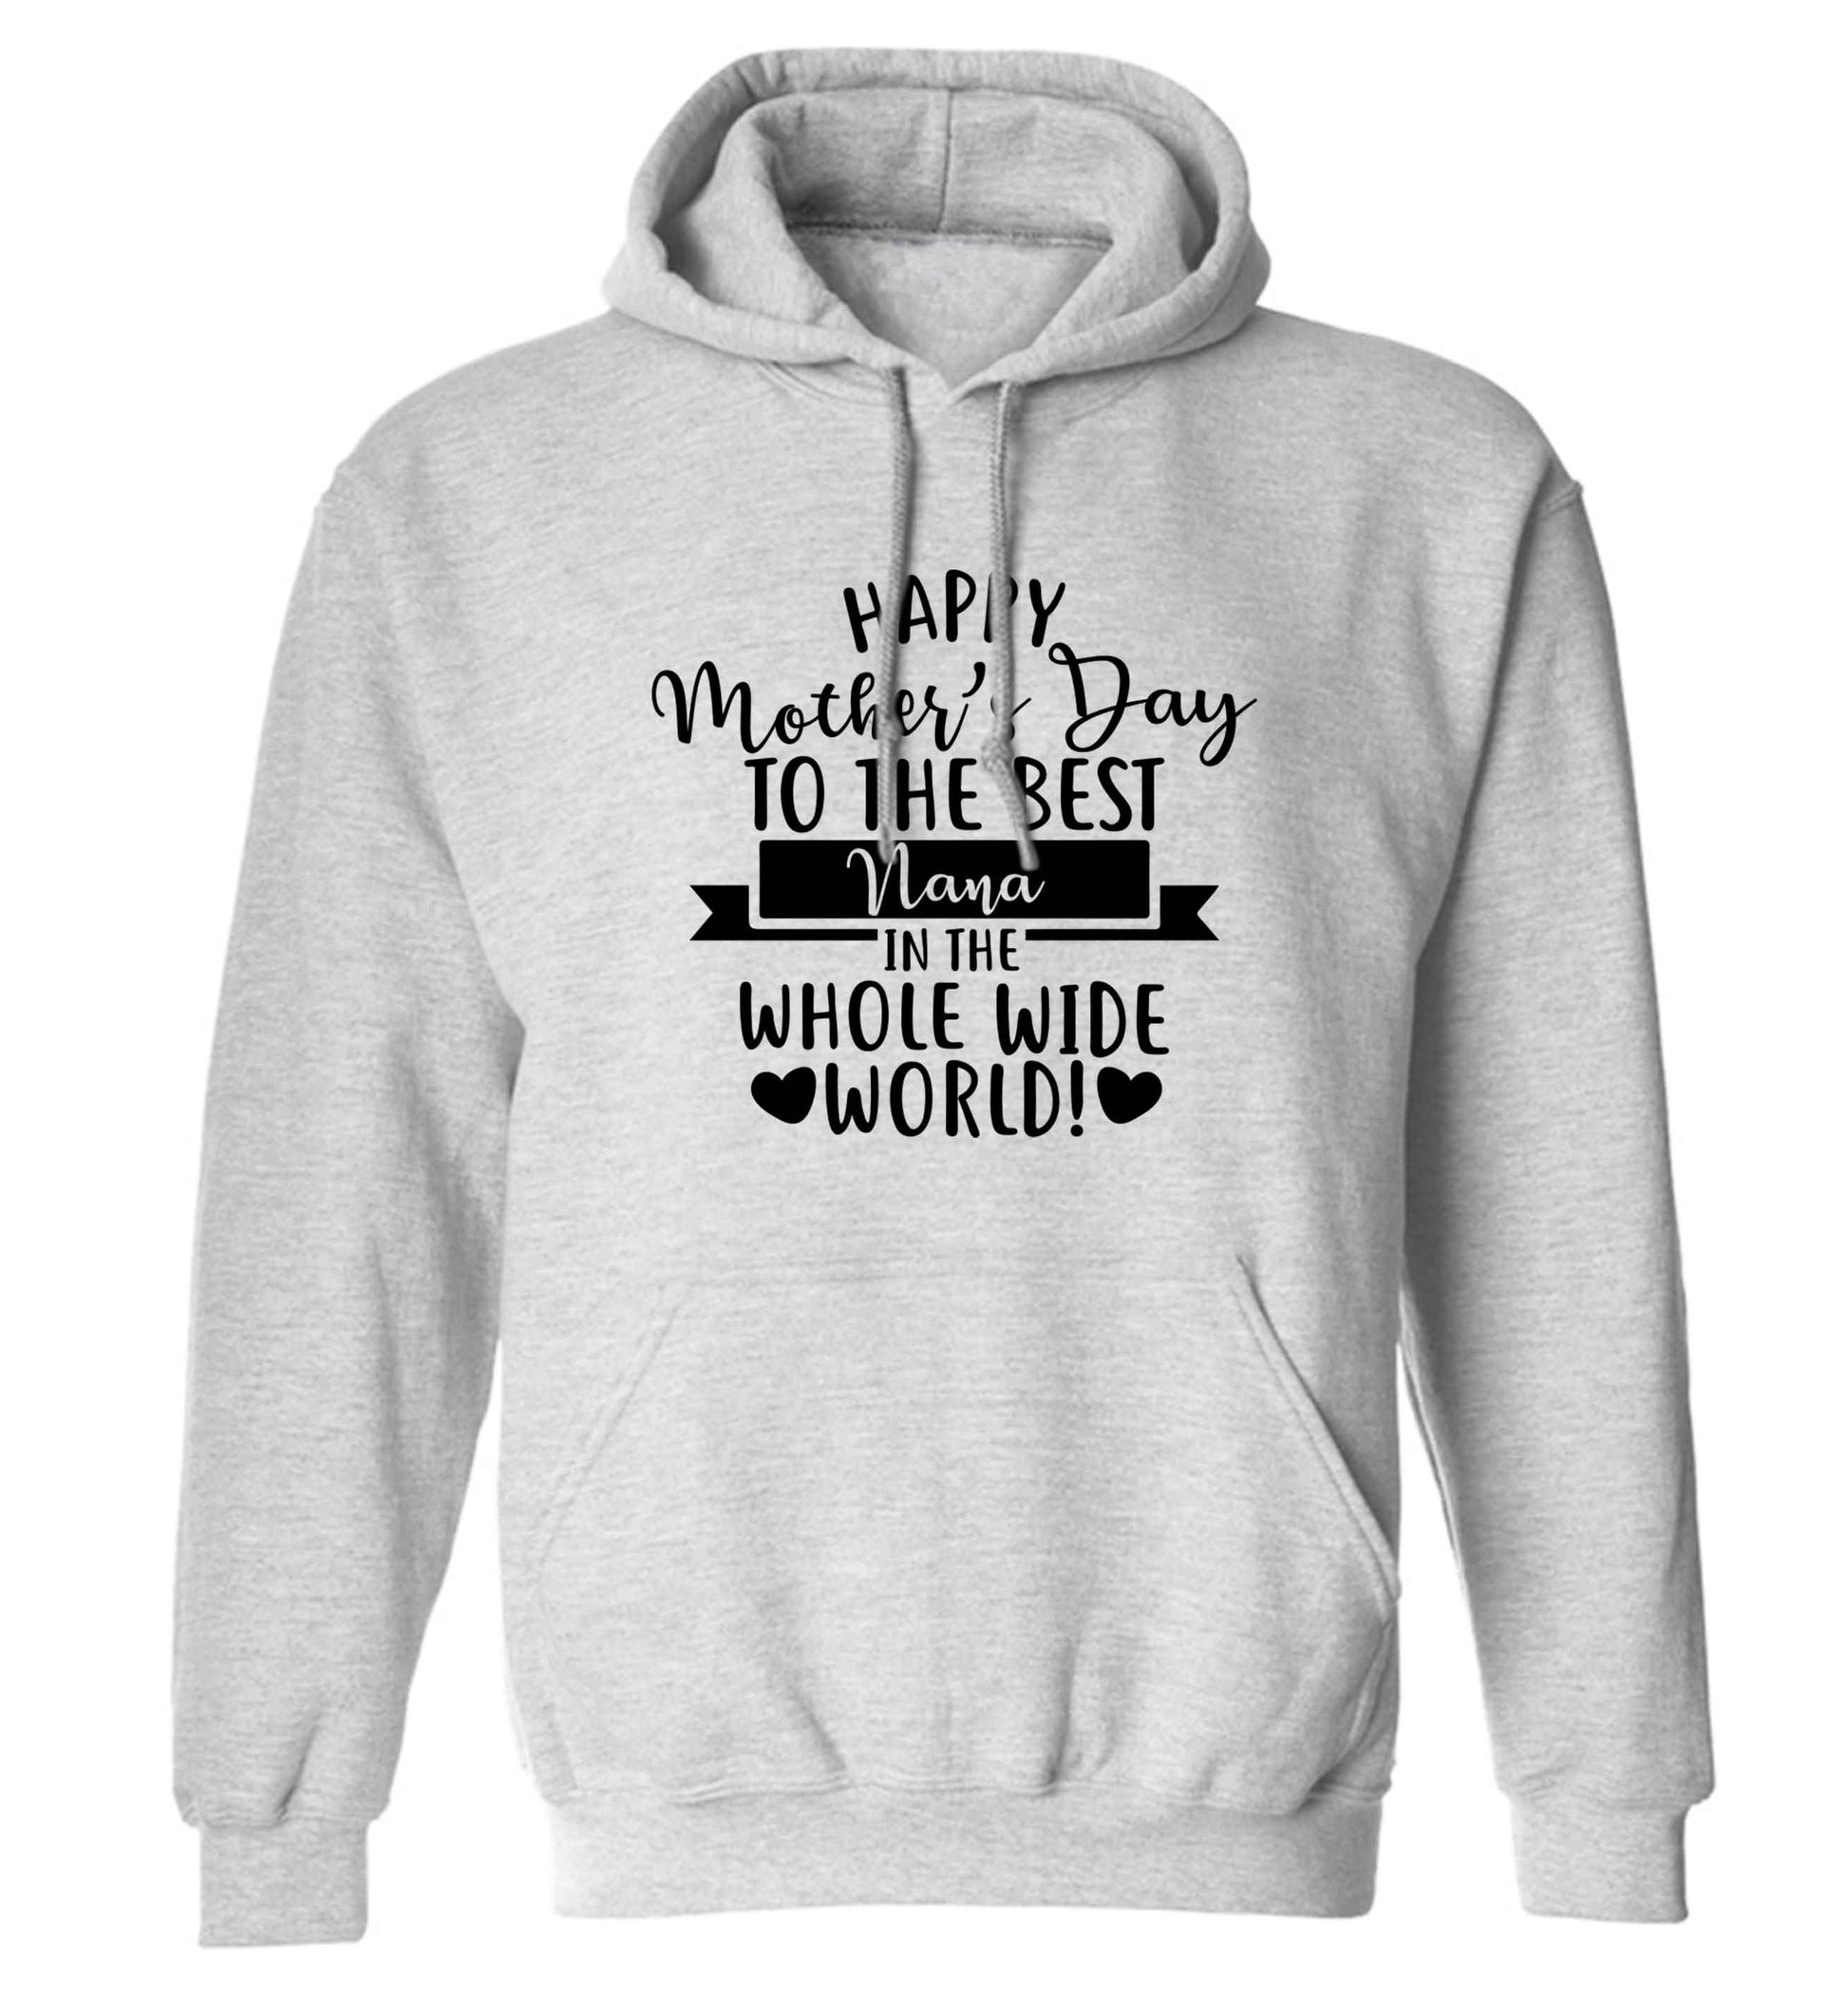 Happy mother's day to the best nana in the world adults unisex grey hoodie 2XL